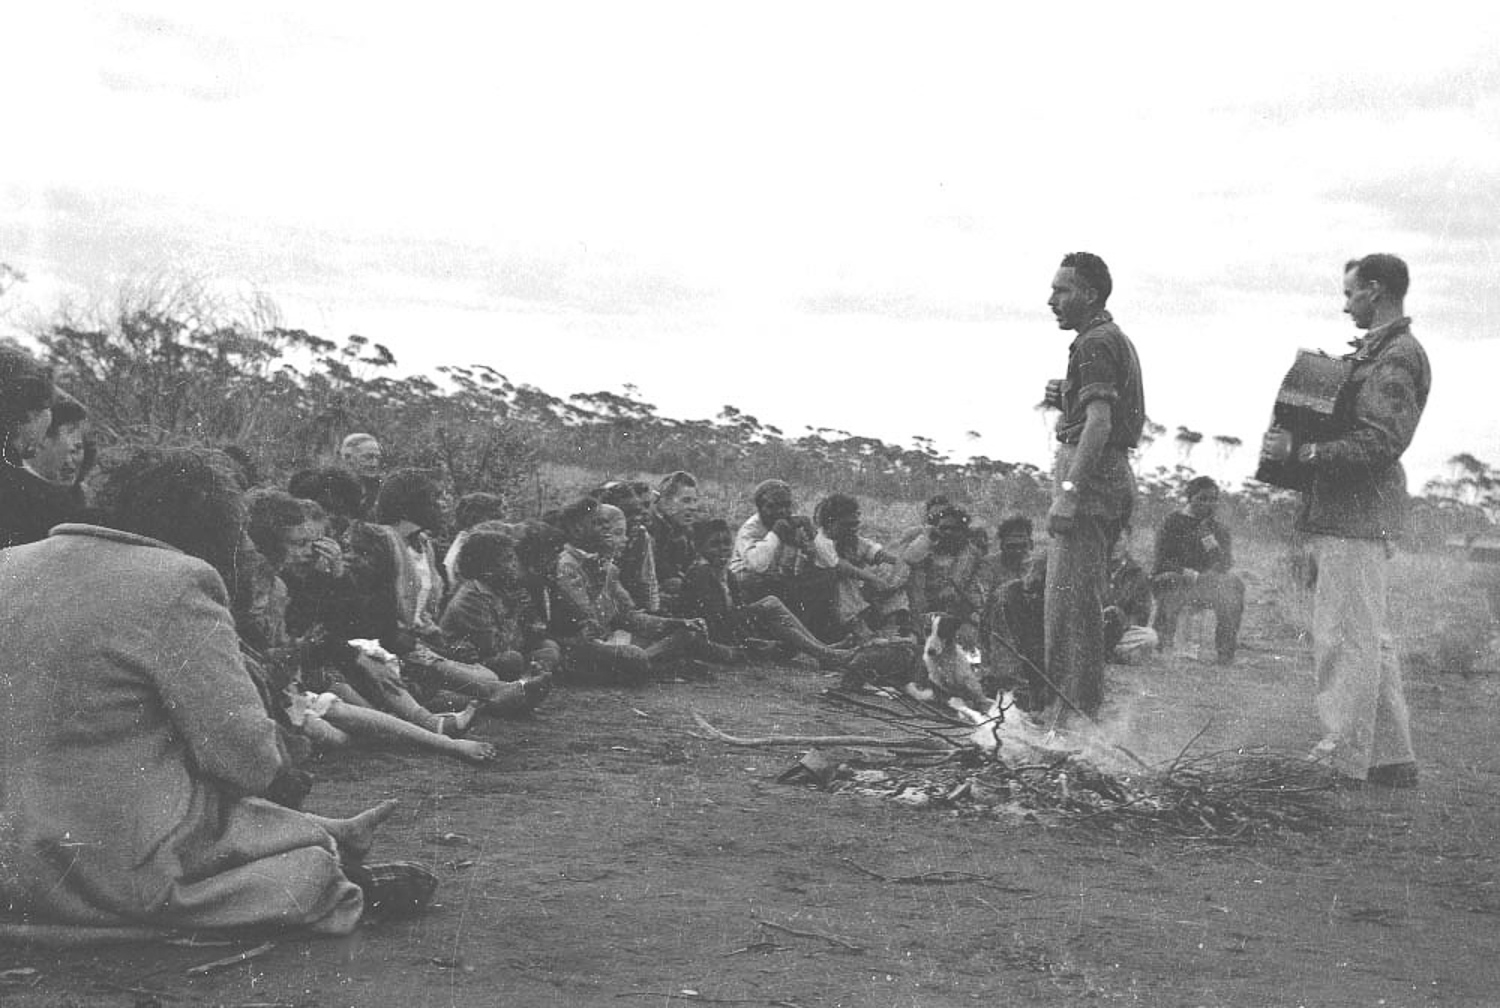 A church camp meeting at Cundeelee, led by missionary, teacher and photographer Robert McKeich. Anangu would set up bush camps around the mission site, and would be visited by missionaries who would hold church services in an attempt to convert Anangu to Christianity.